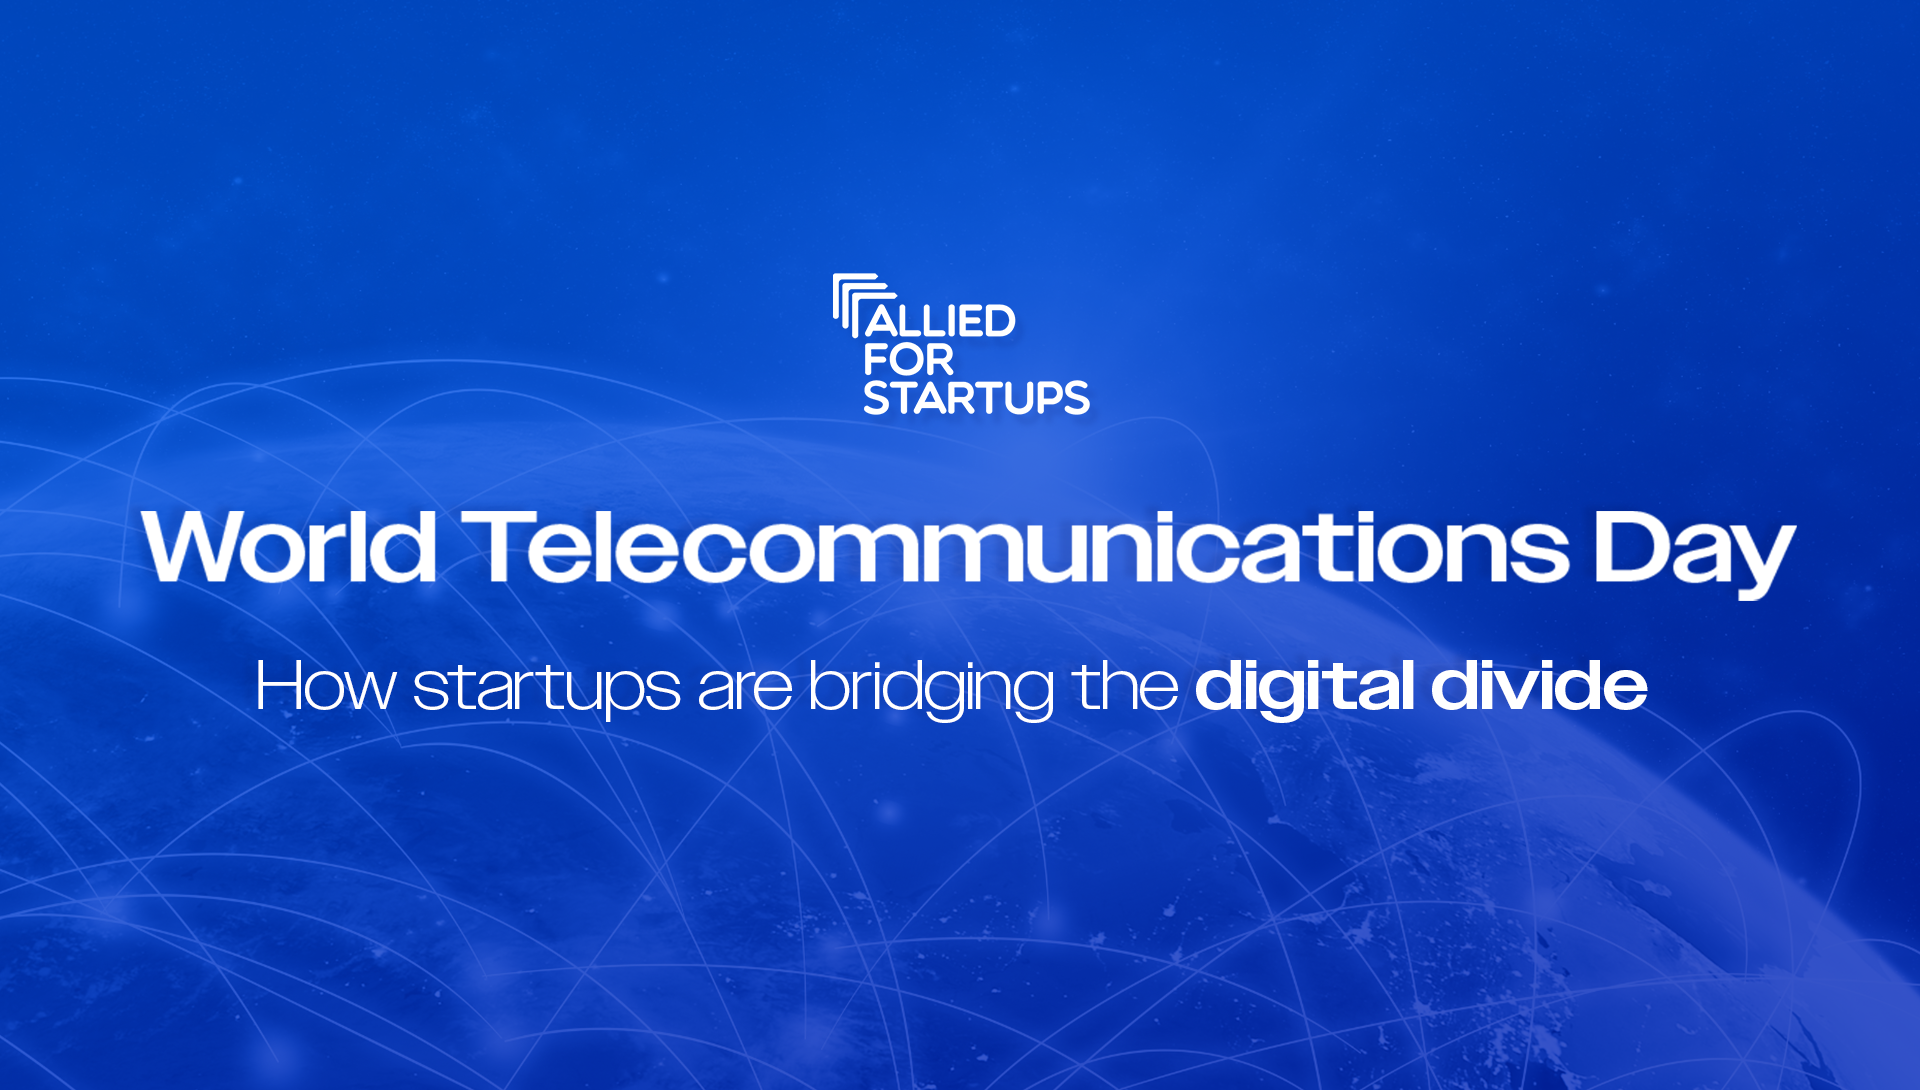 World Telecommunications Day: How startups are bridging the digital divide